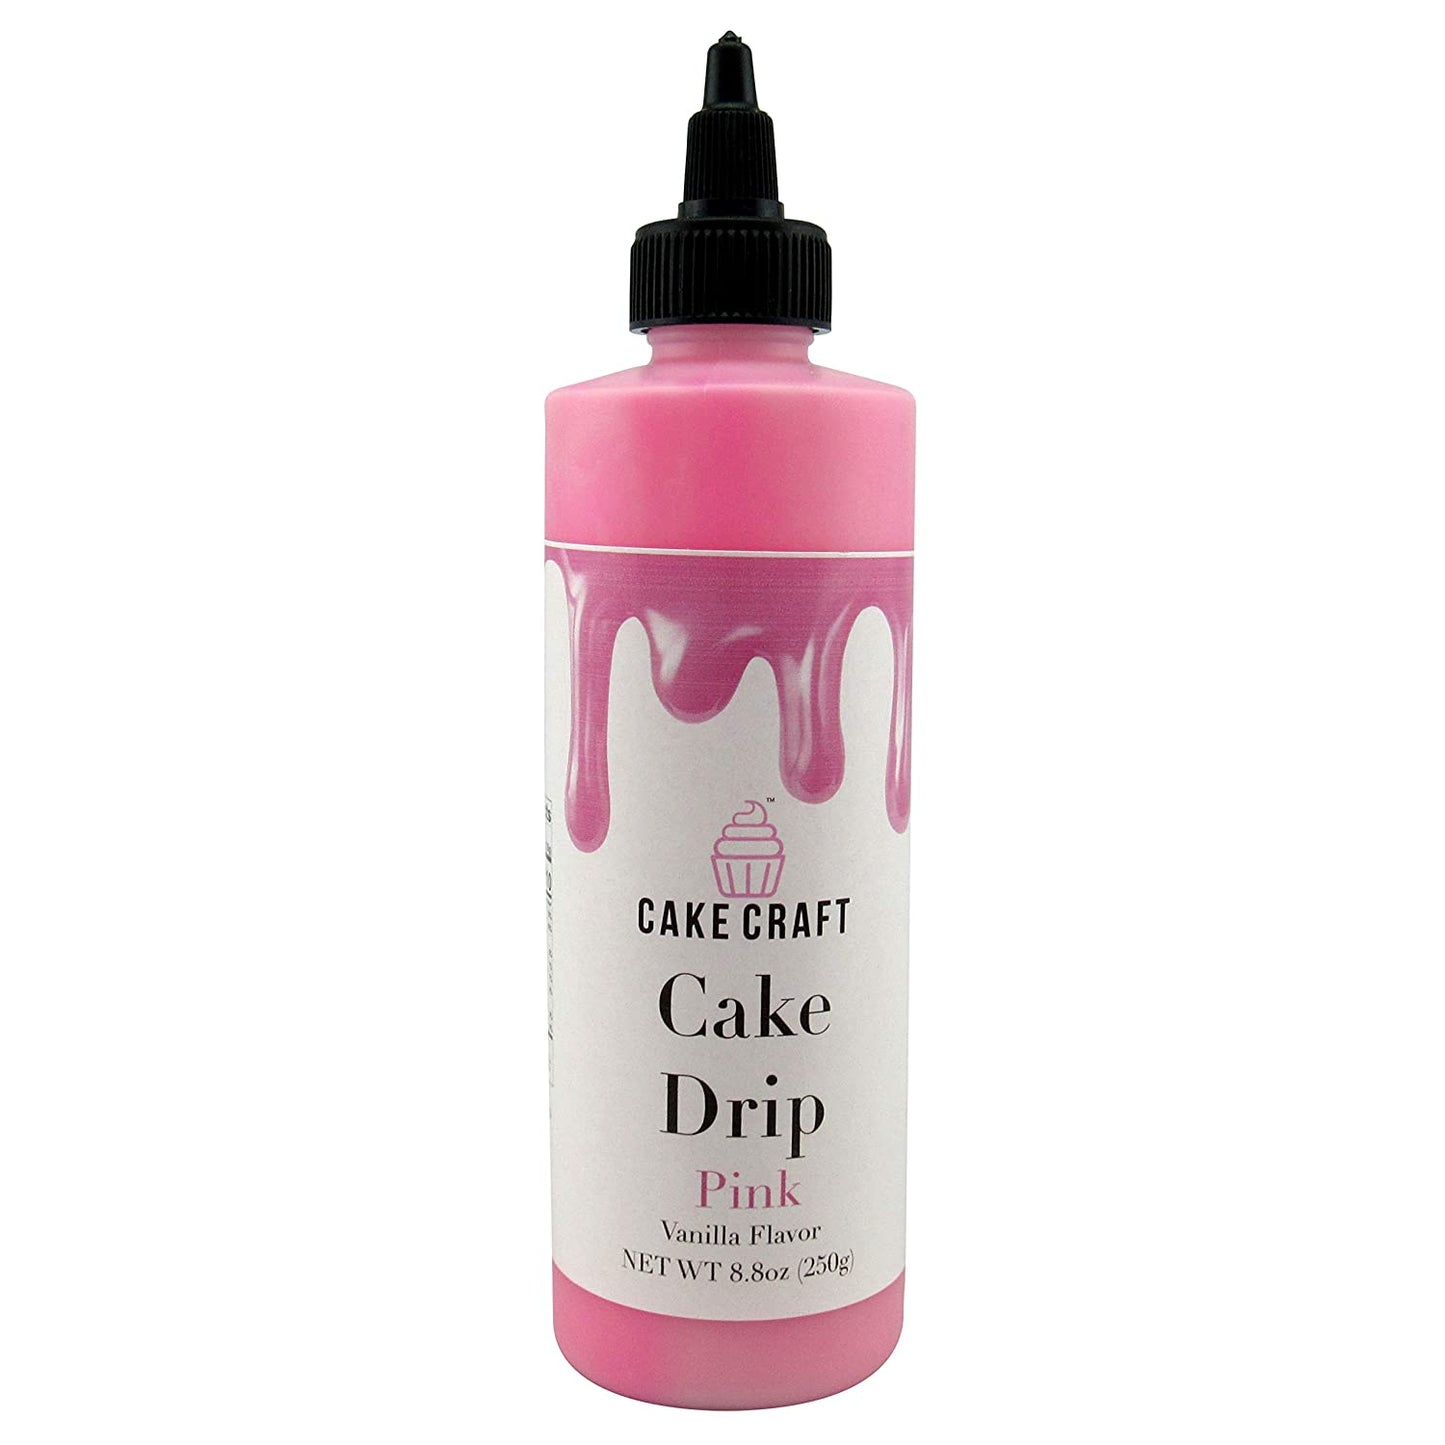 Cake Craft Rosy Pink Cake Drip (Chocolate Flavor) 8.8 Ounces